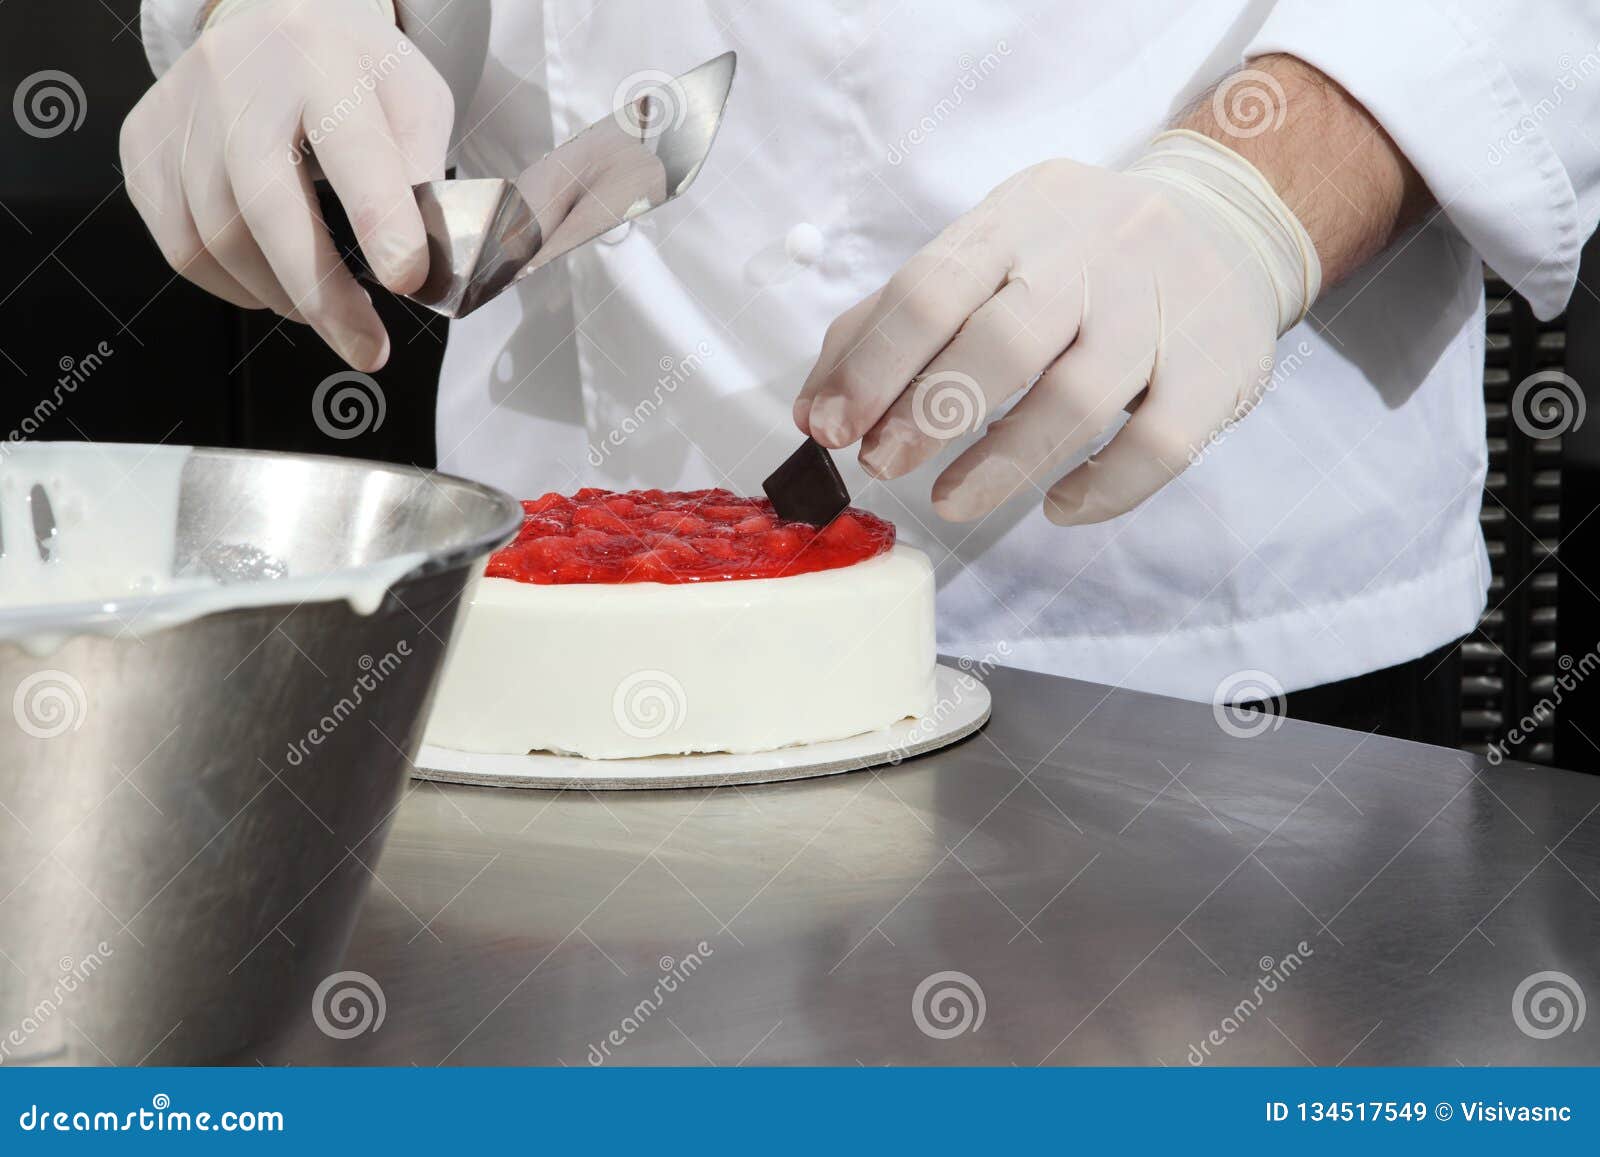 Hands Pastry Chef Prepares a Cake, Cover with Icing and Decorate ...